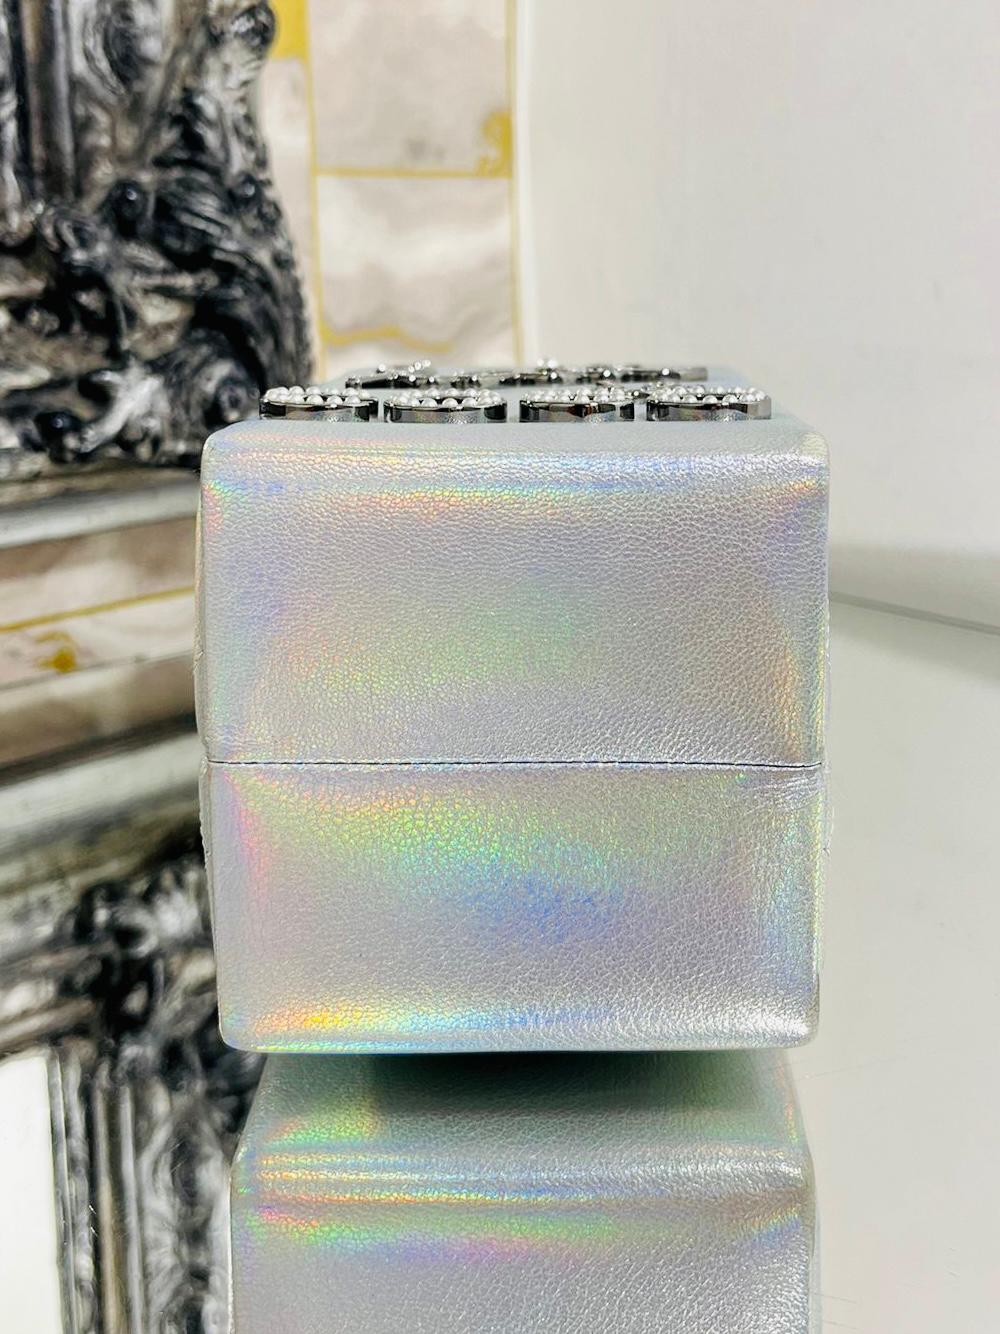 Chanel Iridescent Leather Milk Carton Handbag From The Supermarket Collection In Good Condition In London, GB